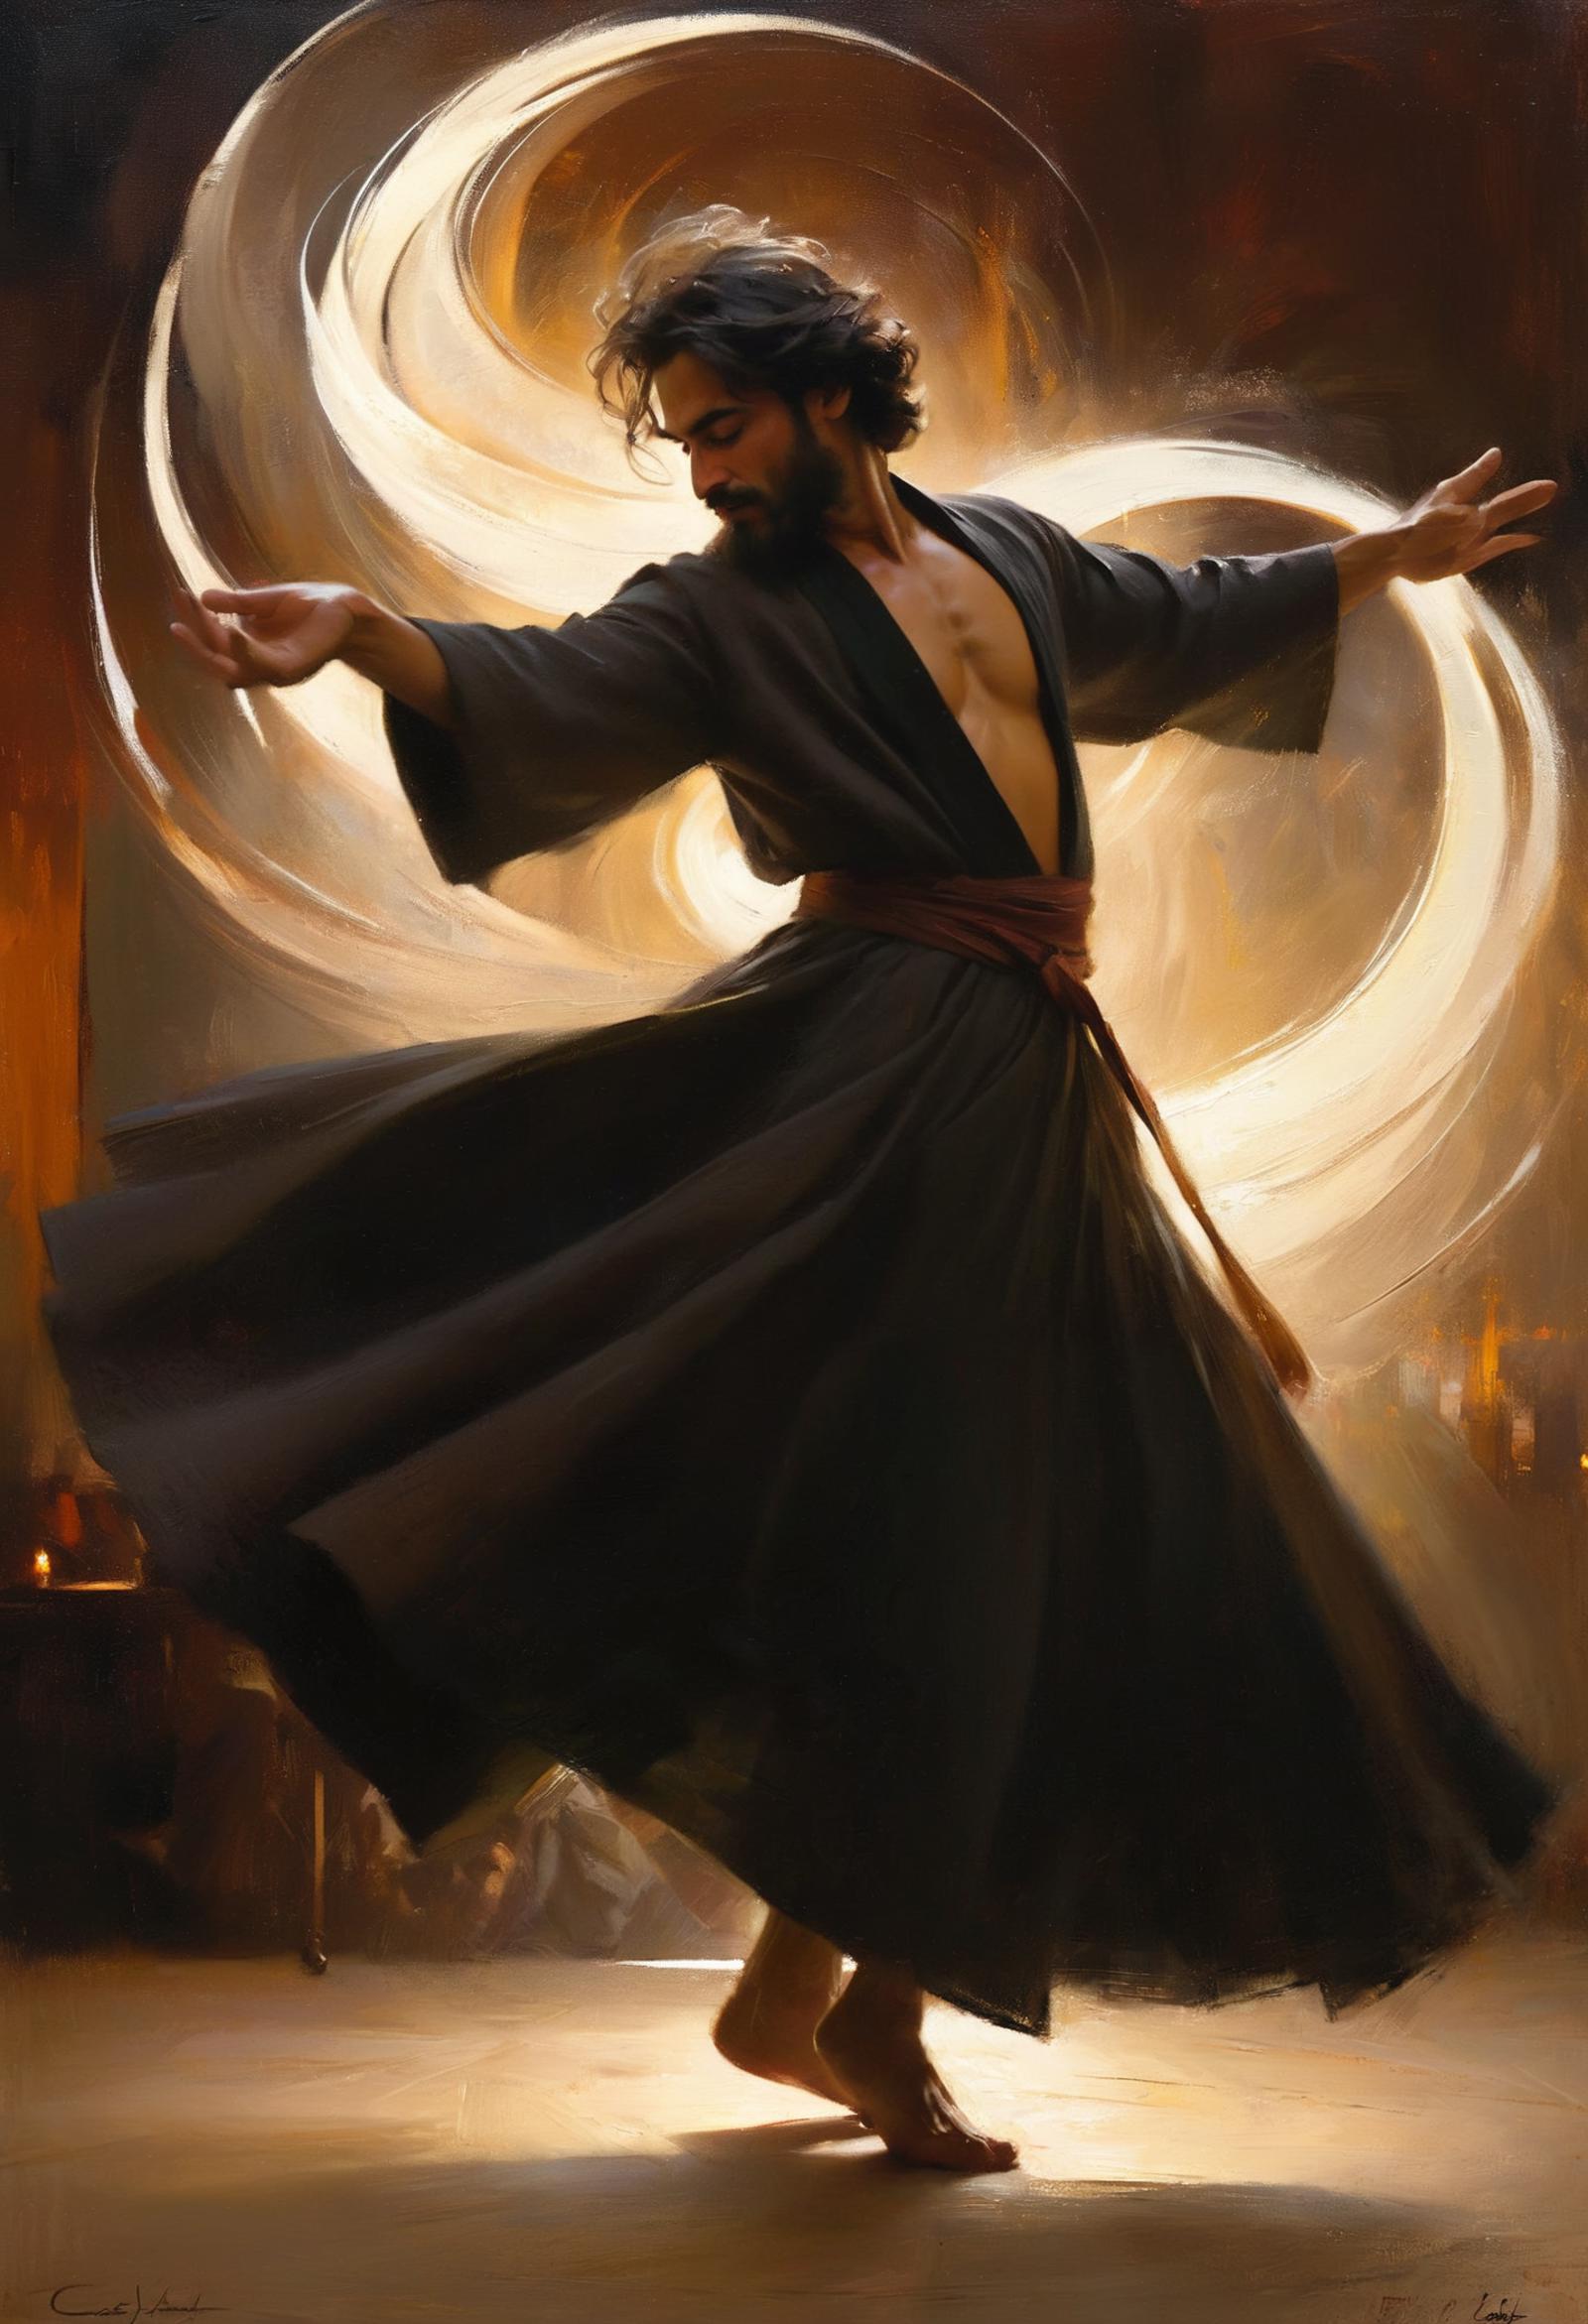 Man in a long black robe dancing with his arms extended.